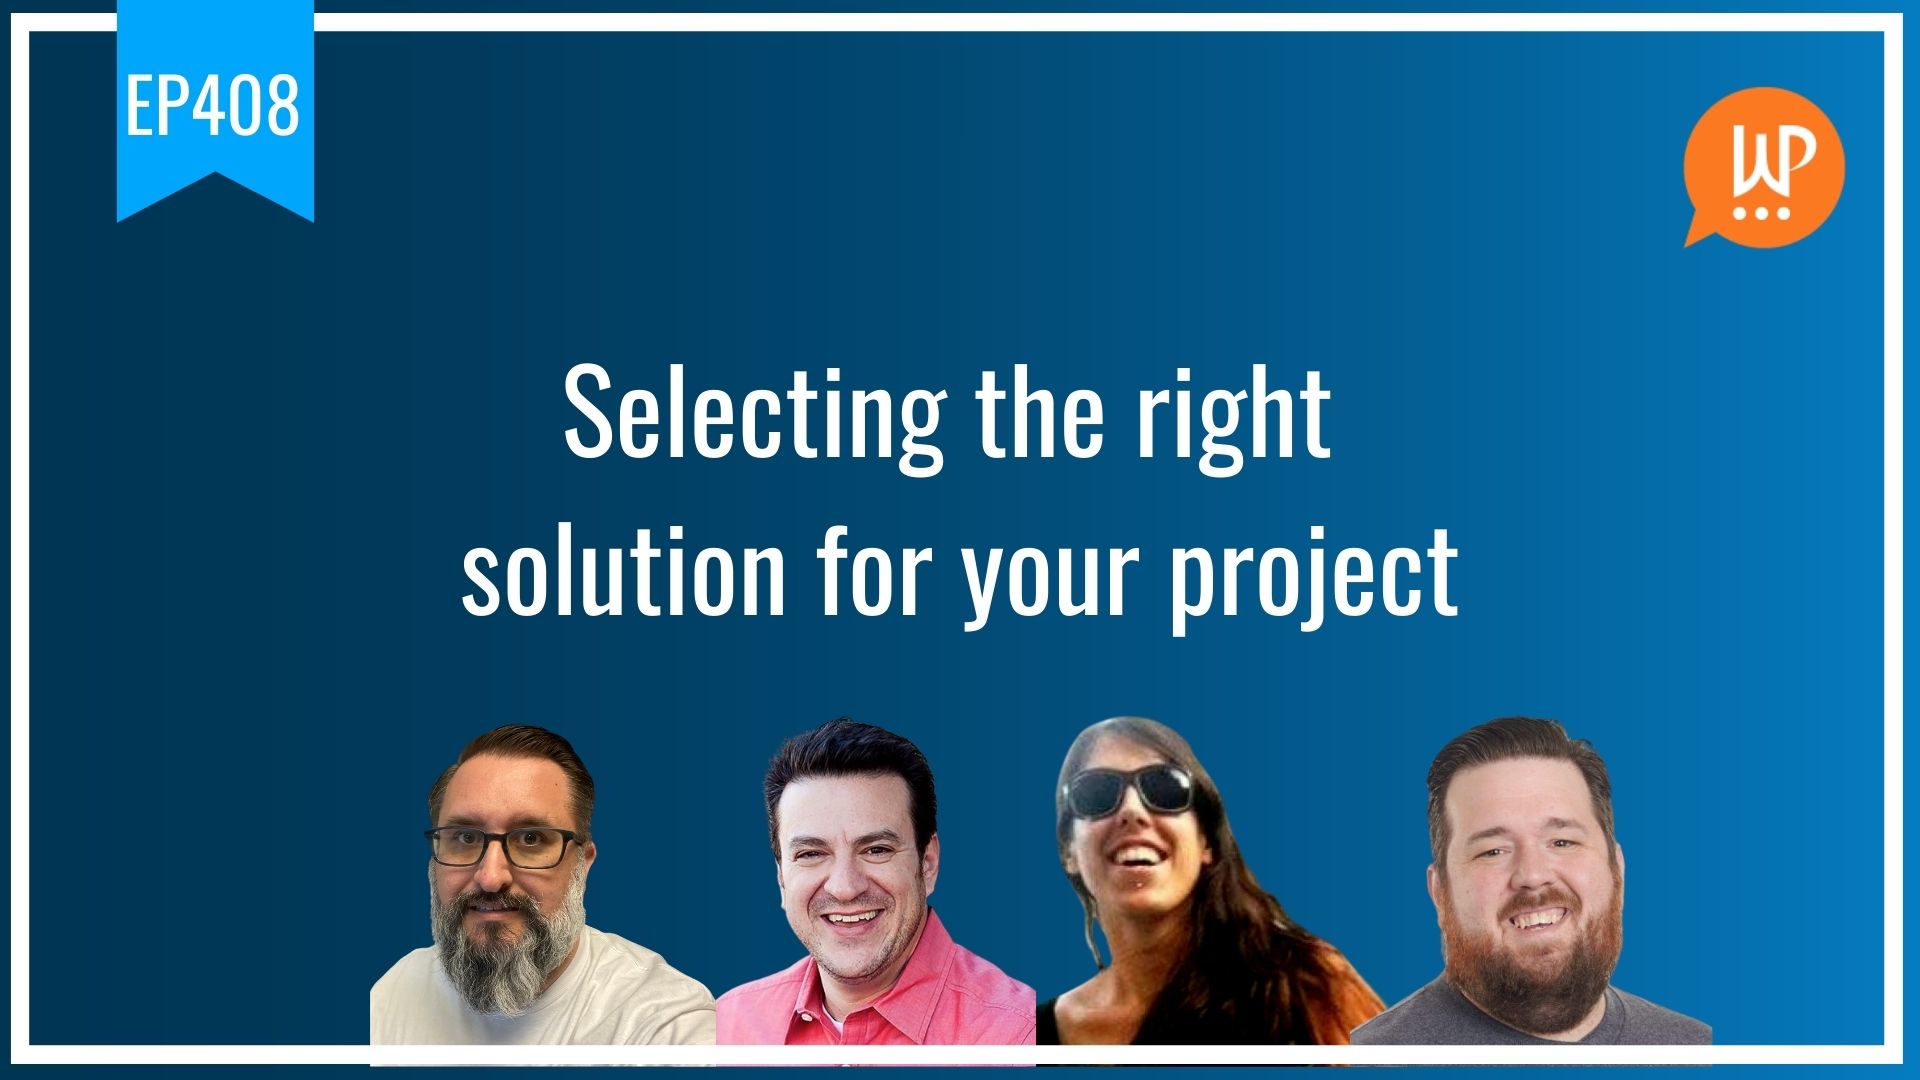 EP408 – Selecting the right solution for your project